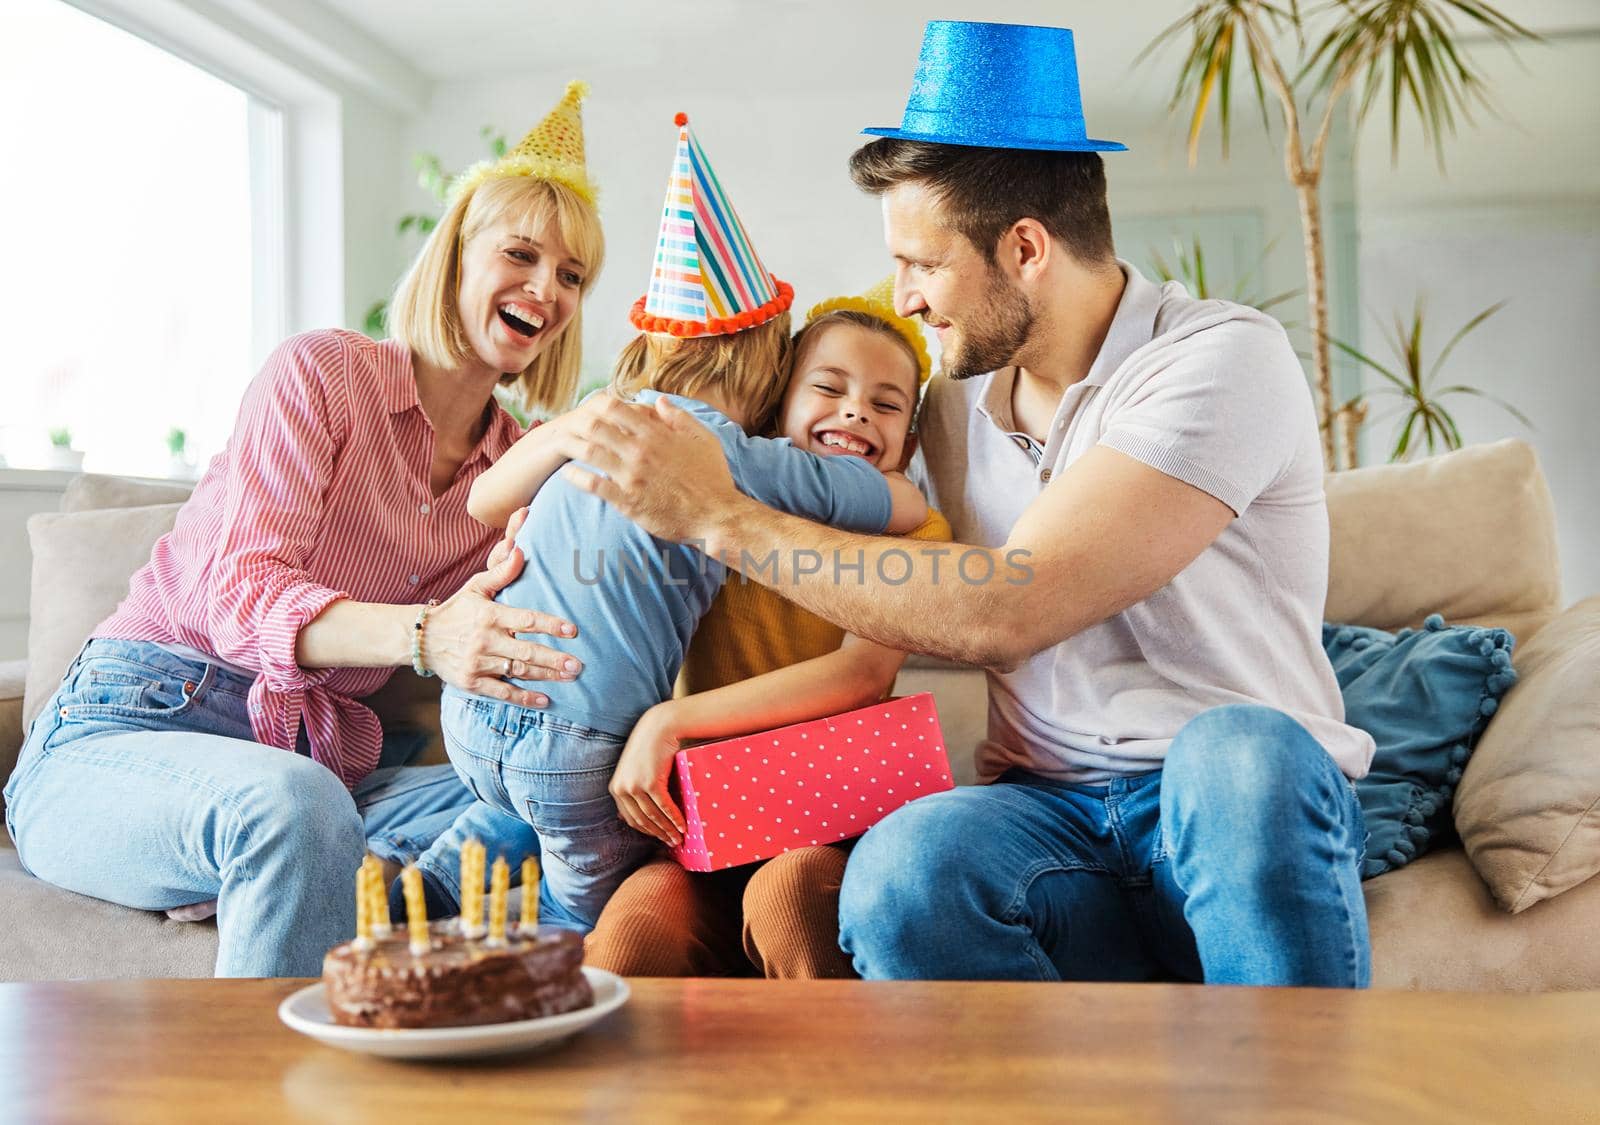 child family birthday celebration party cake father happy mother daughter son parent boy girl fun together candle holiday hat presen by Picsfive